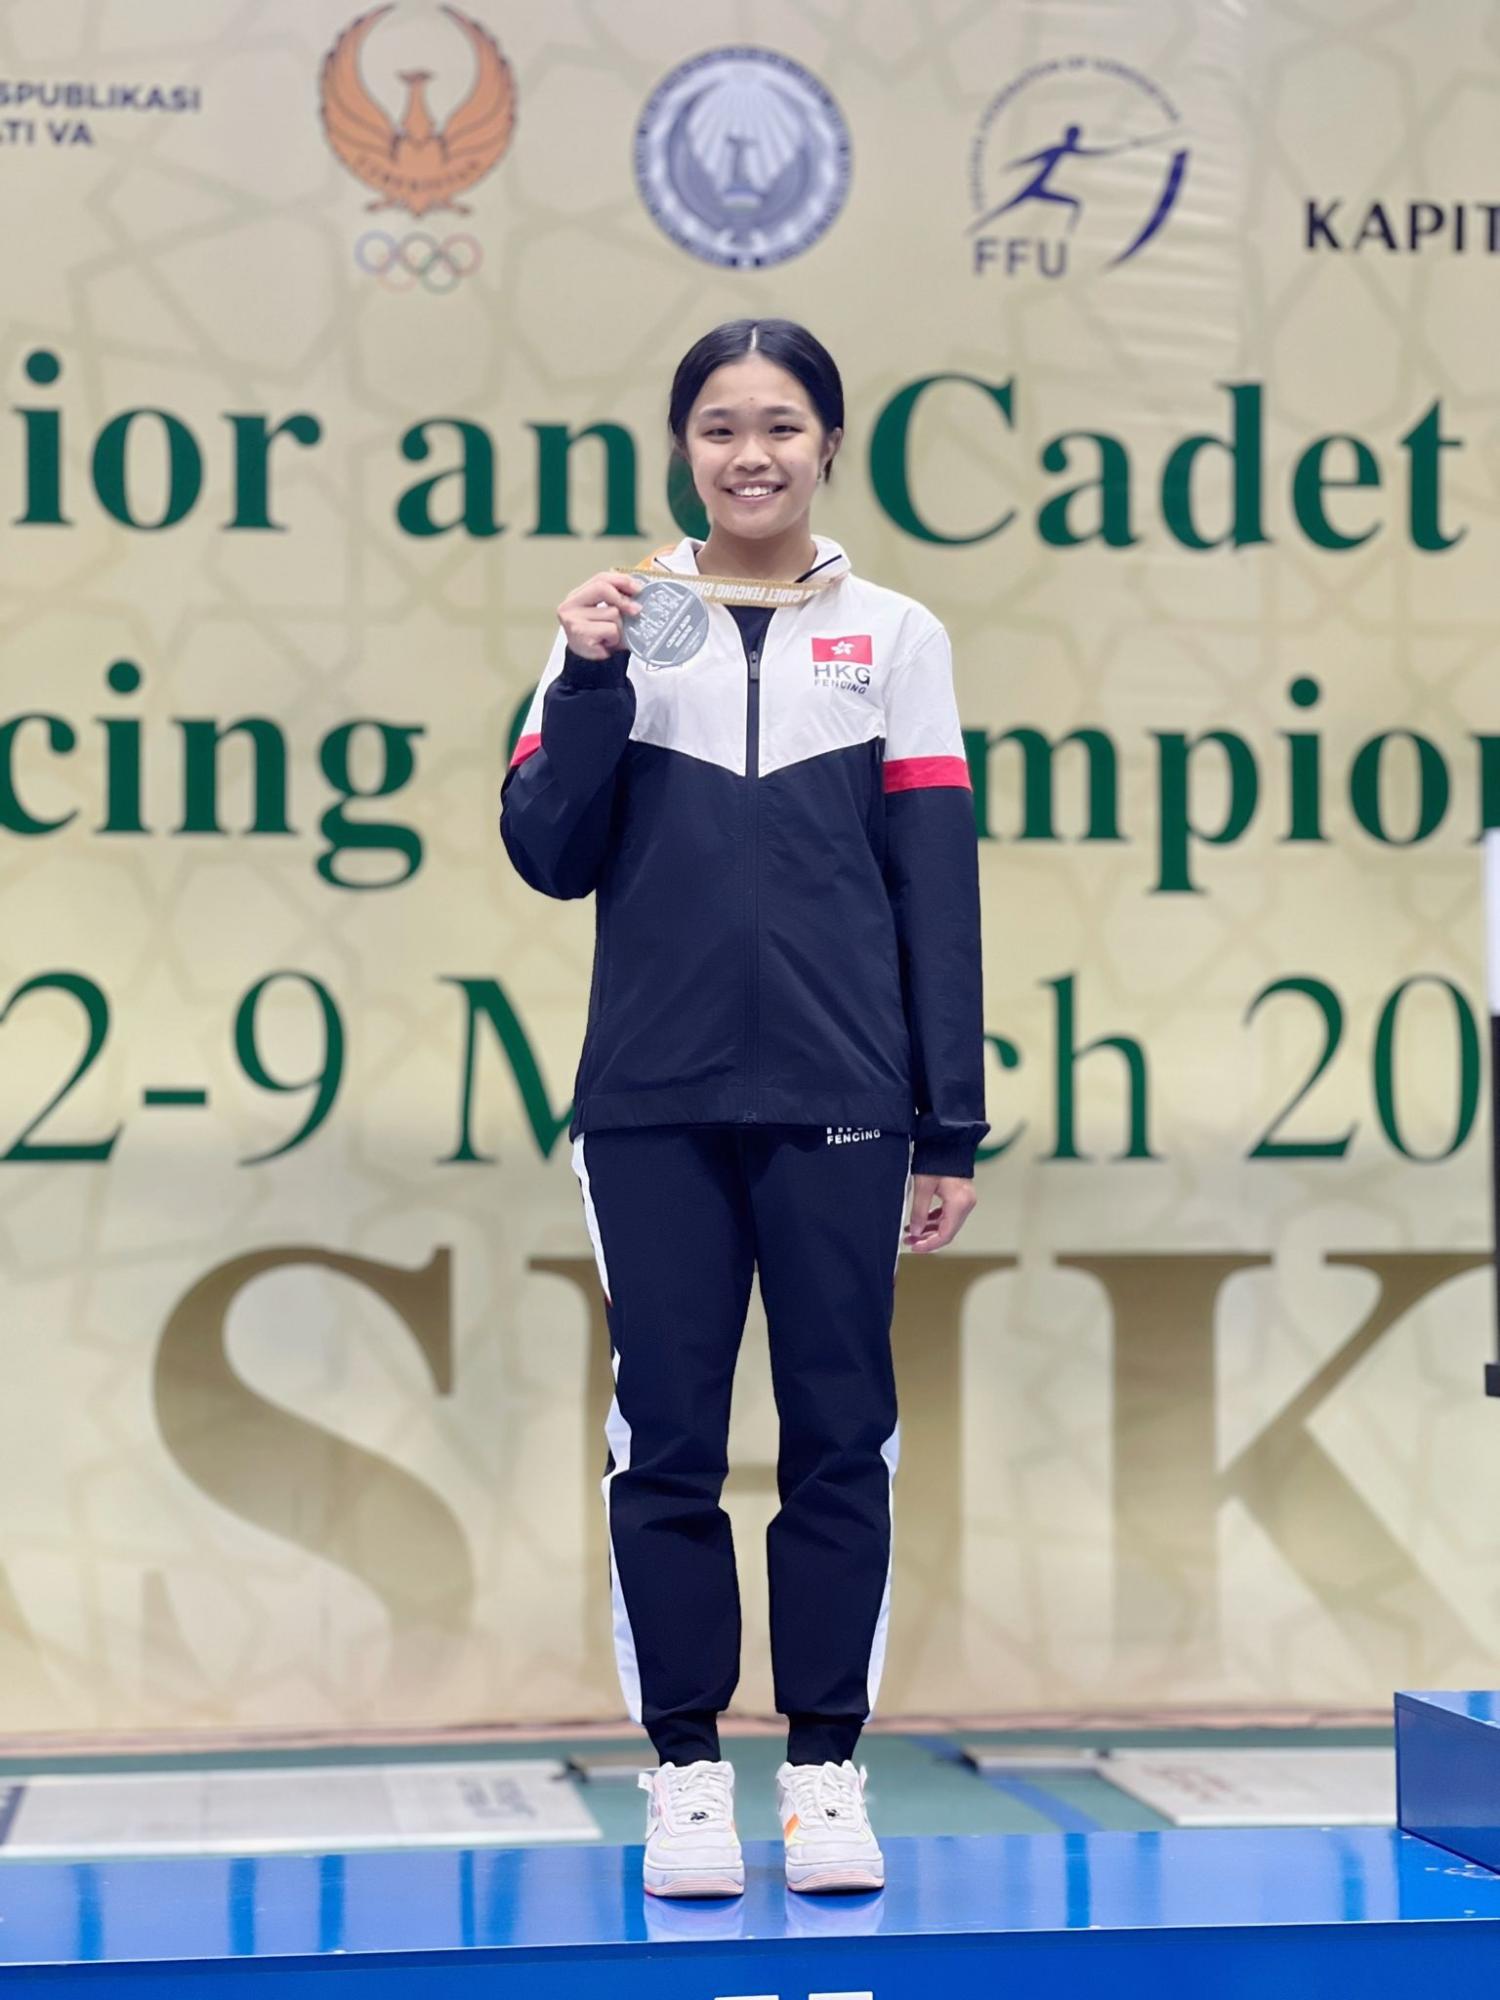 Silver Medal in Women's Foil at Asian Junior and Cadet Fencing